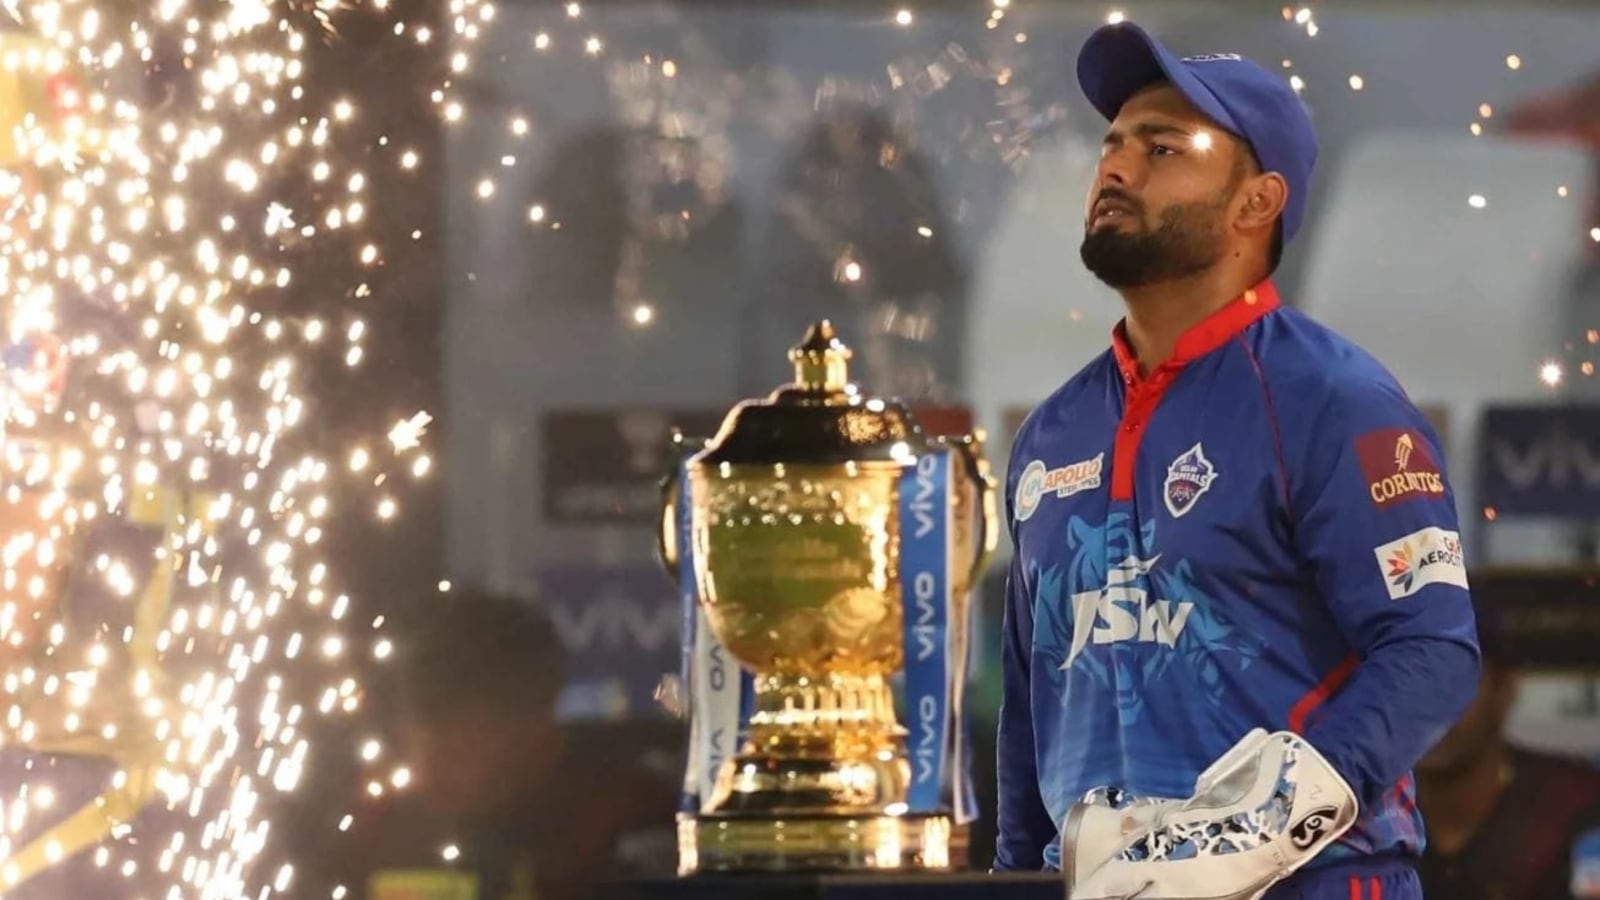 Delhi Capitals unveil their new jersey ahead of IPL 2021 - Crictoday